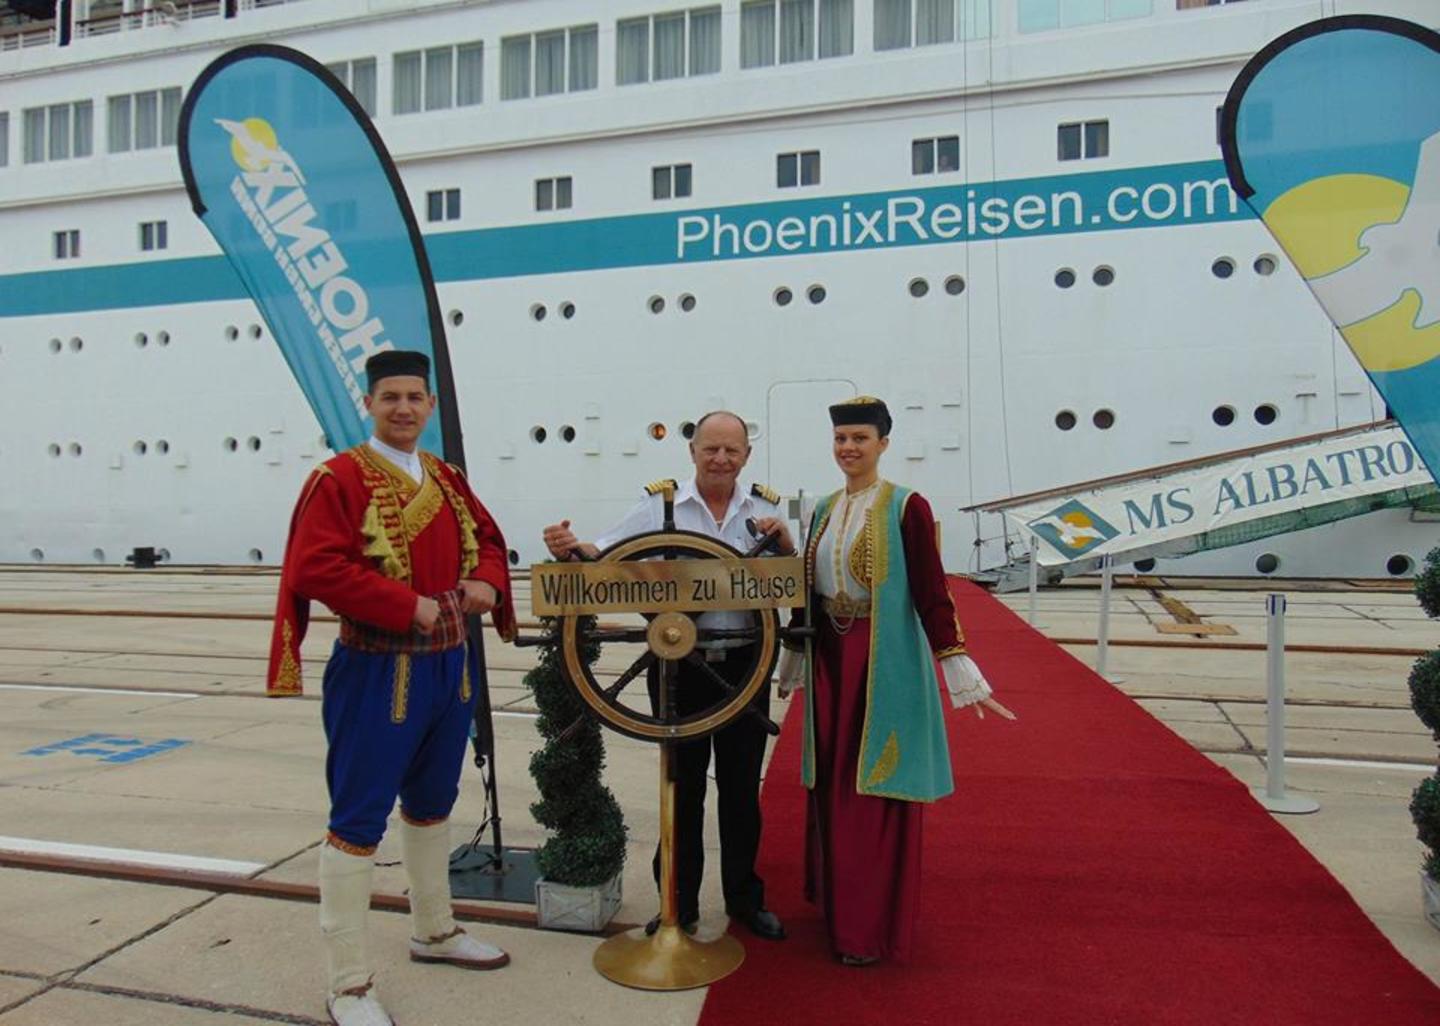 BAR CRUISE PORT ACCEPTED  A SHIP OF GERMAN COMPANY COMPANY PHONEIX REISEN FOR THE FIRST TIME